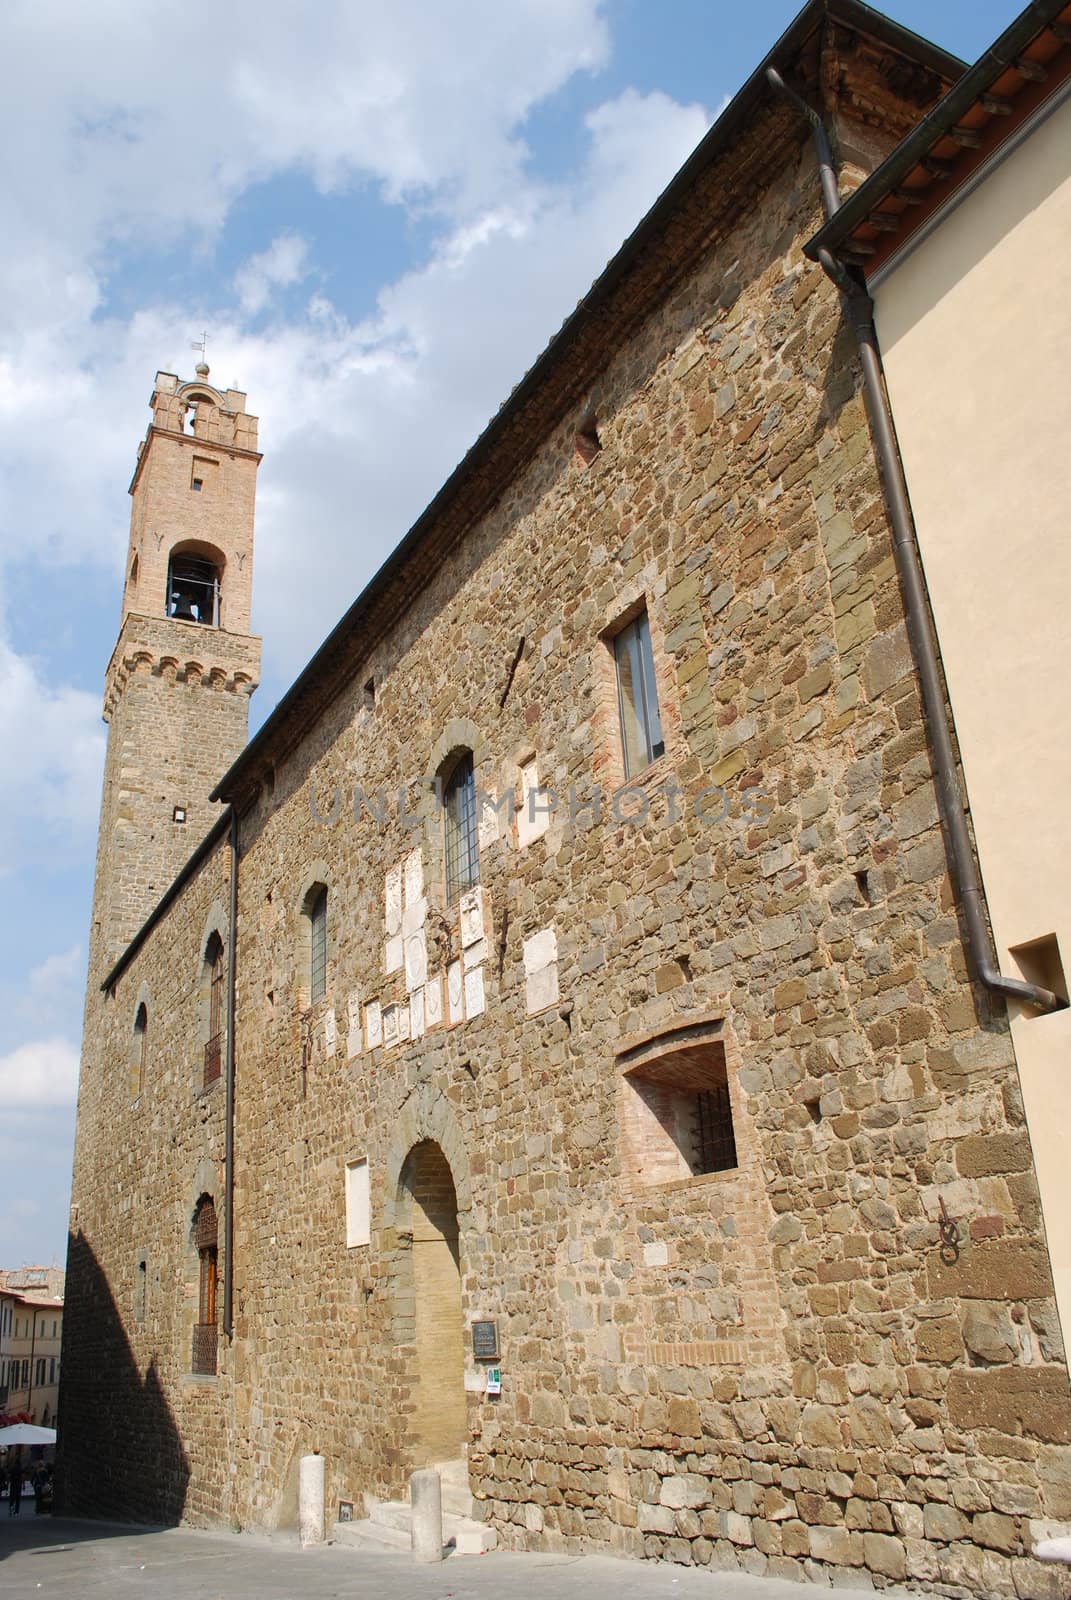 A typical example of the medieval architecture in Tuscany